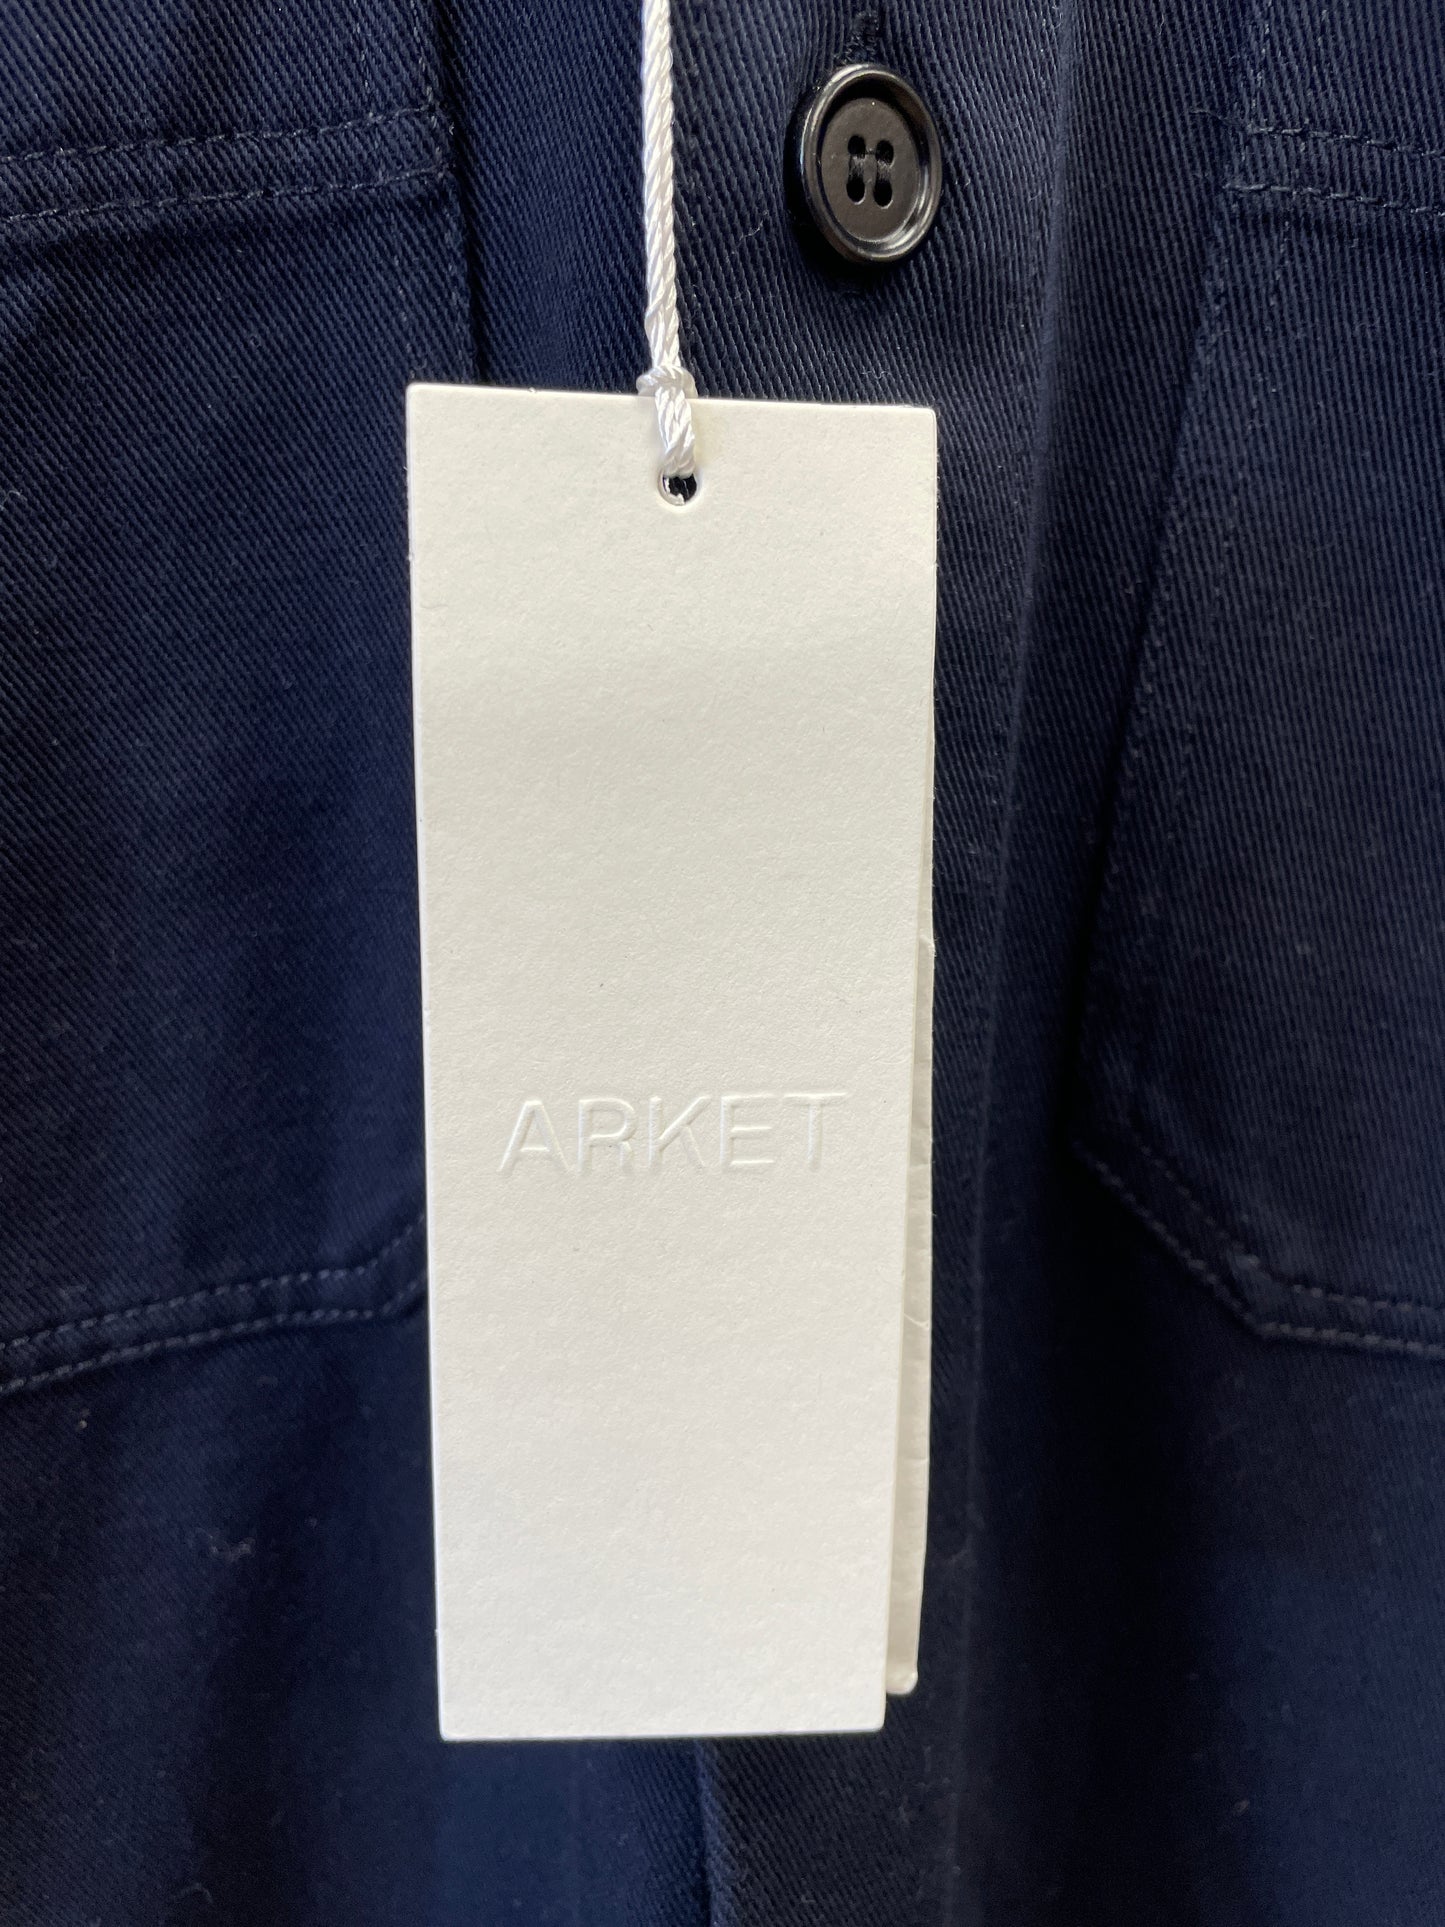 New with Tags Arket Navy Blue Long Sleeve Shirt Size Eur 46 UK Small